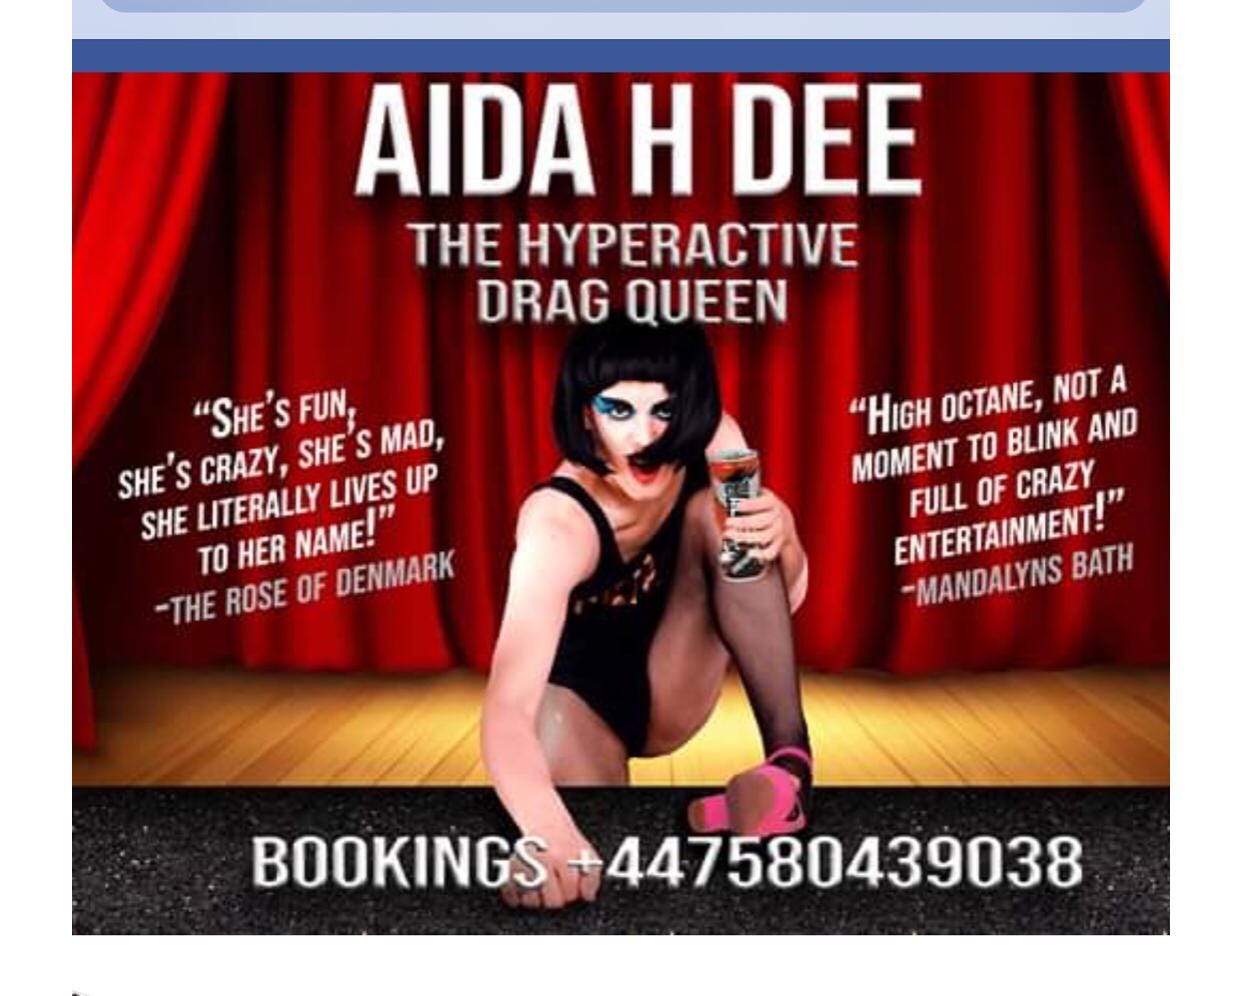 Aida H Dee The Storytime Drag Queen